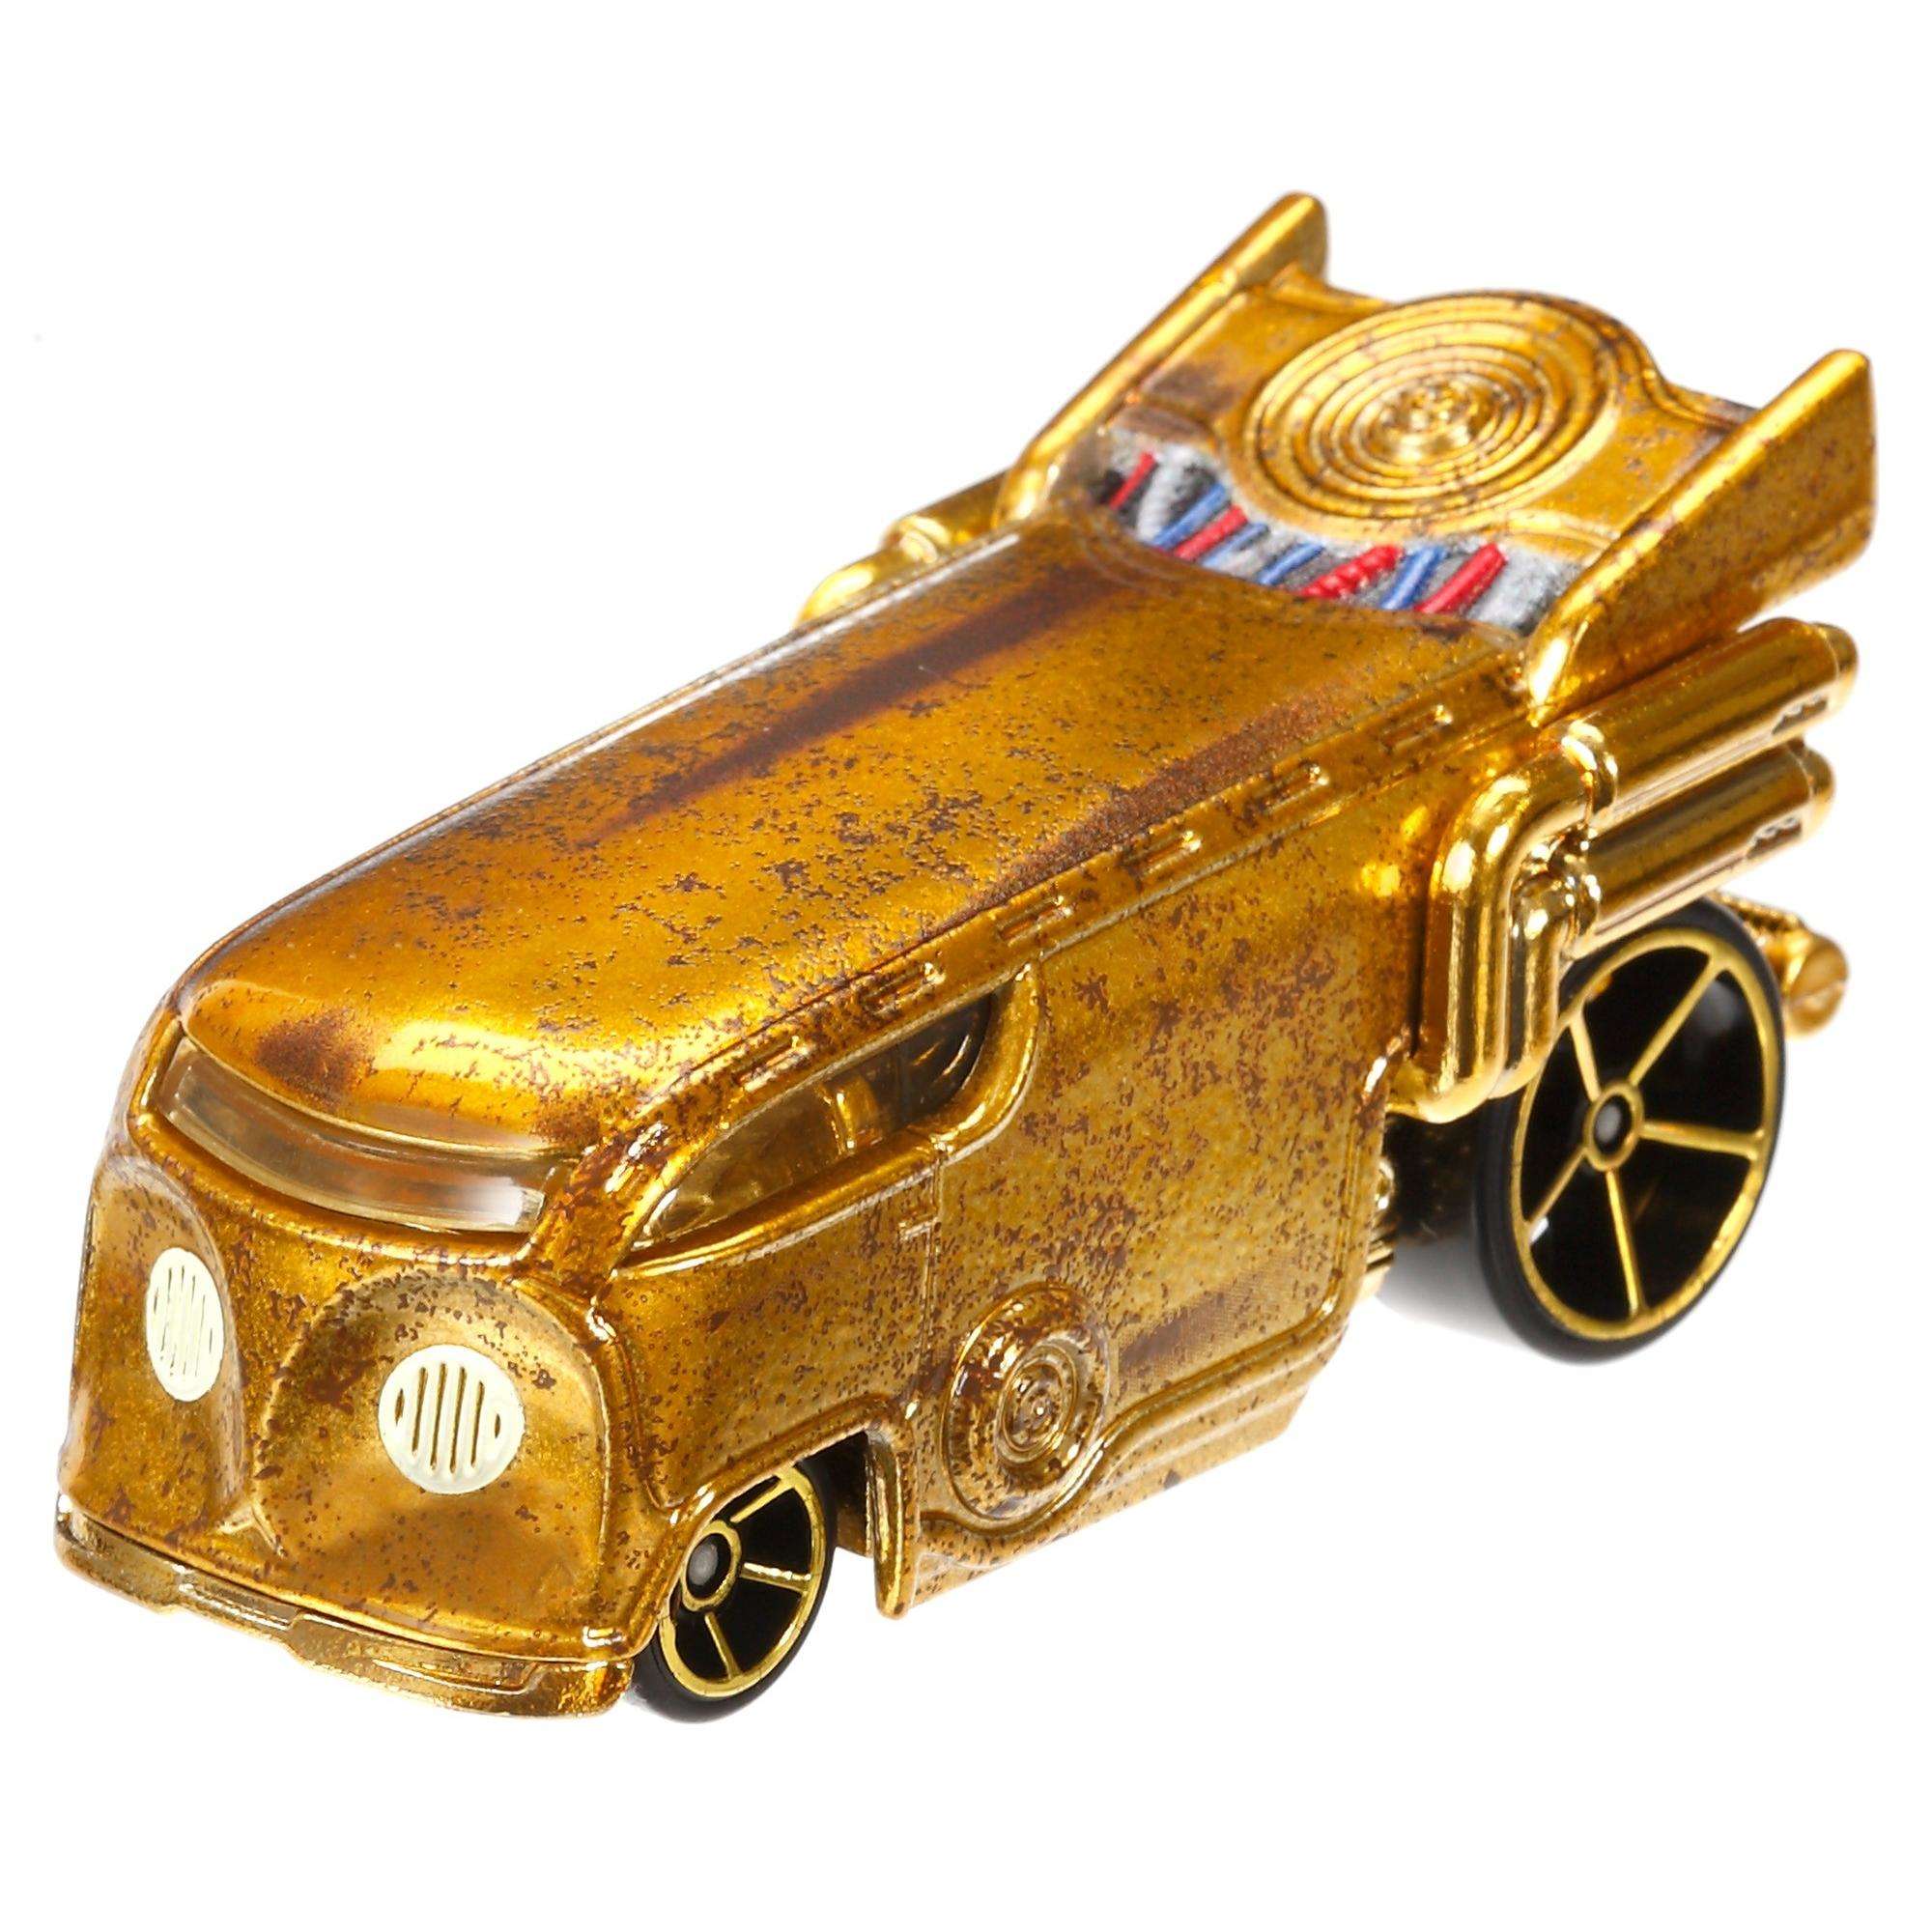 Star Wars Hot Wheels C-3PO & R2-D2 Character Vehicles (2014) Mattel Toy Car 2-Pack - image 2 of 5